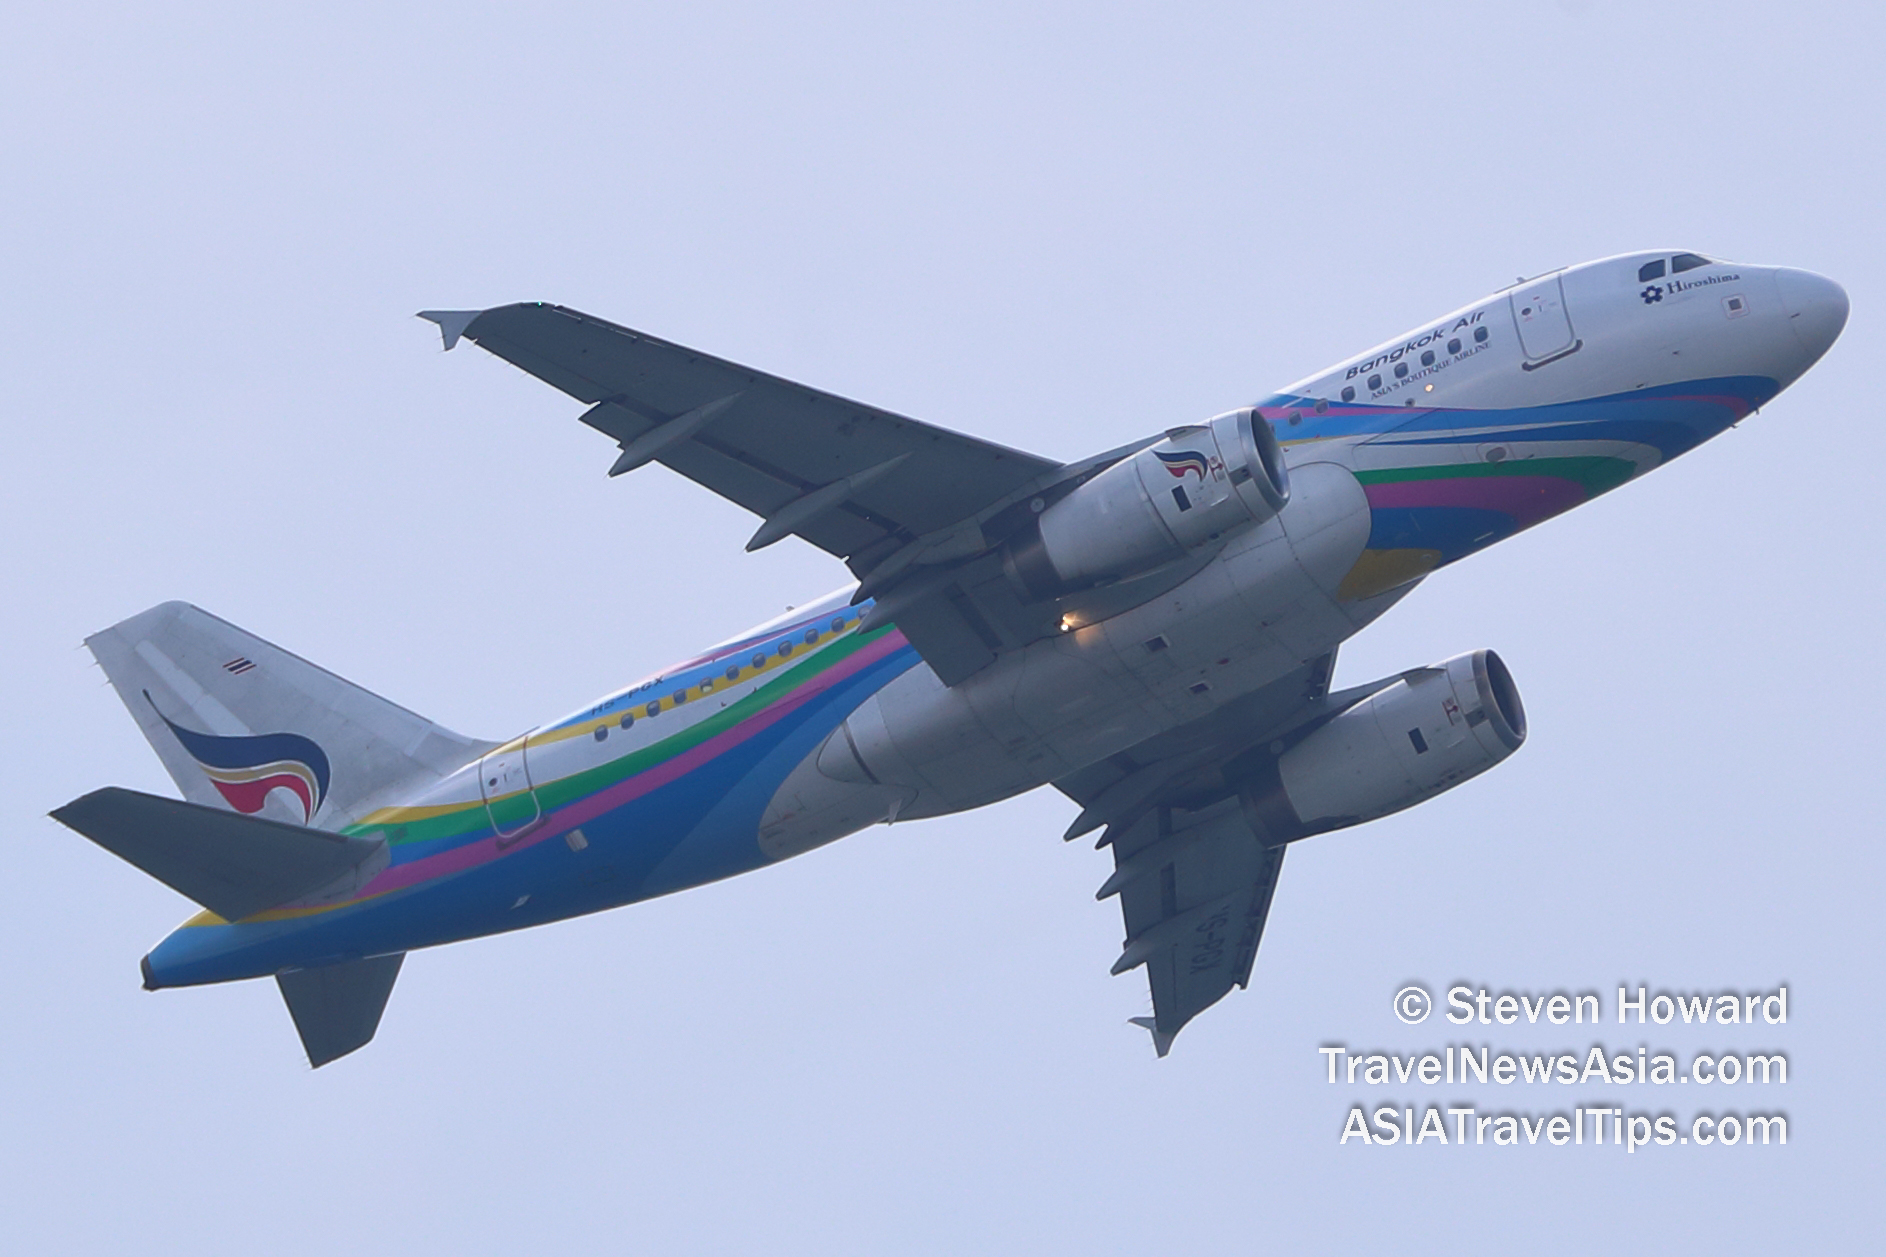 Bangkok Airways Airbus A319 reg: HS-PGX. Picture by Steven Howard of TravelNewsAsia.com Click to enlarge.